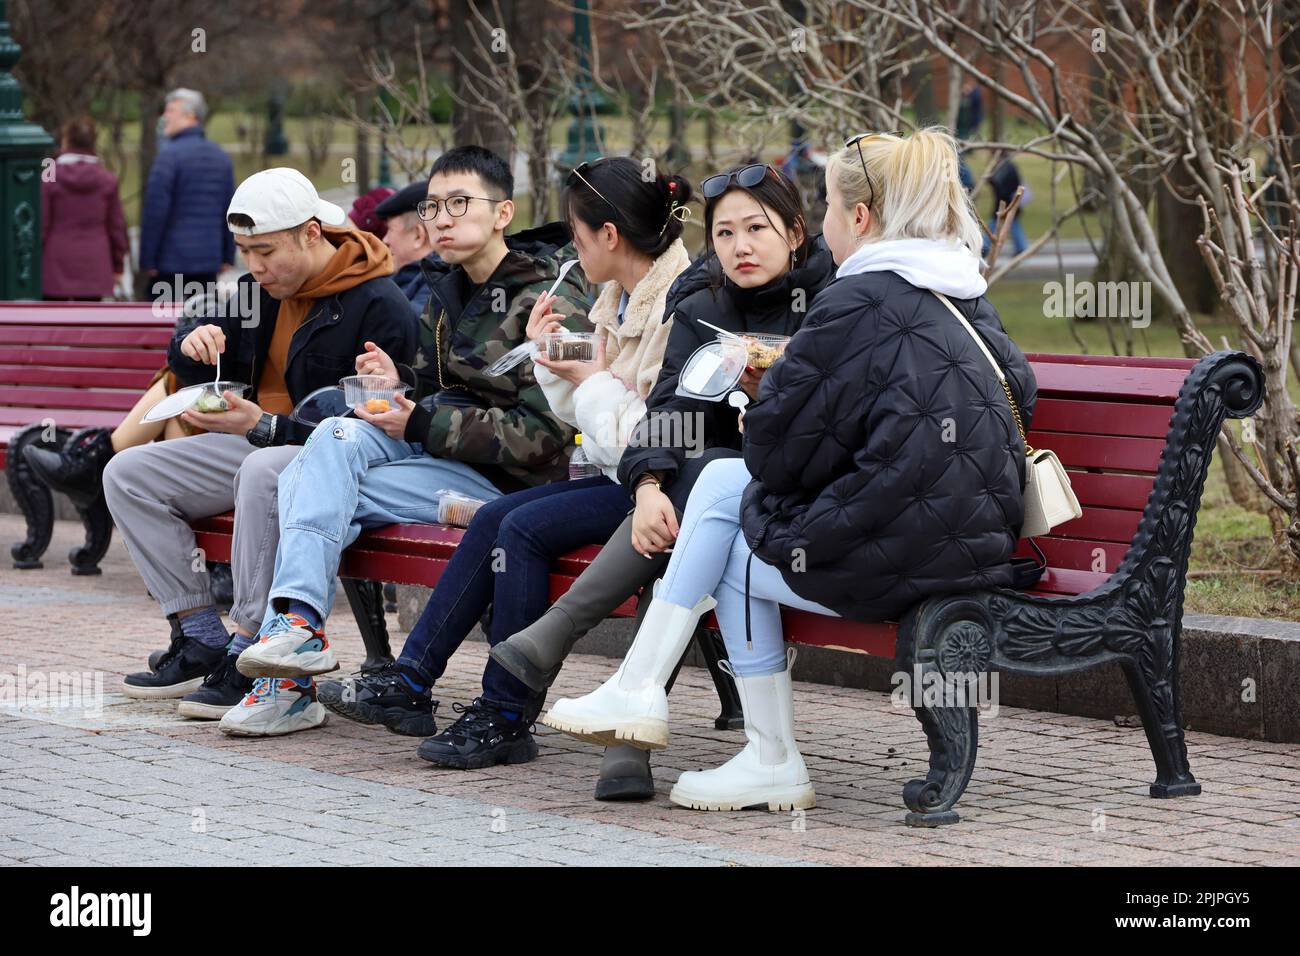 Asian girls and guys eat street food sitting on the bench in spring park. Tourists in Russia Stock Photo